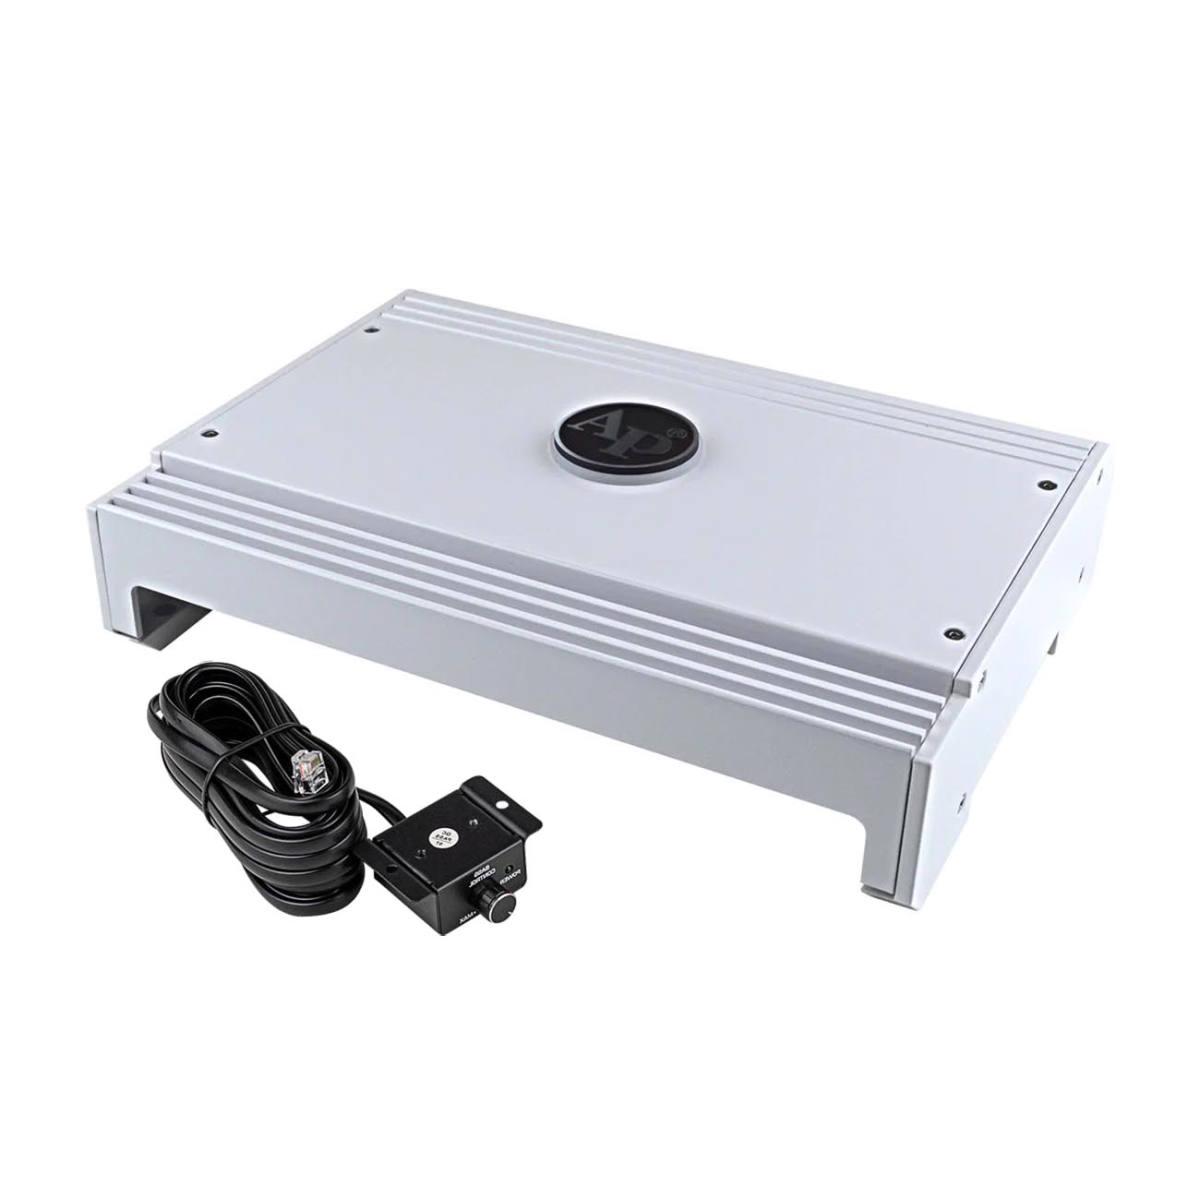 Picture of Audiopipemap APSR4120GS 780W 4 Channel Class D Marine Amplifier with Remote Bass Knob